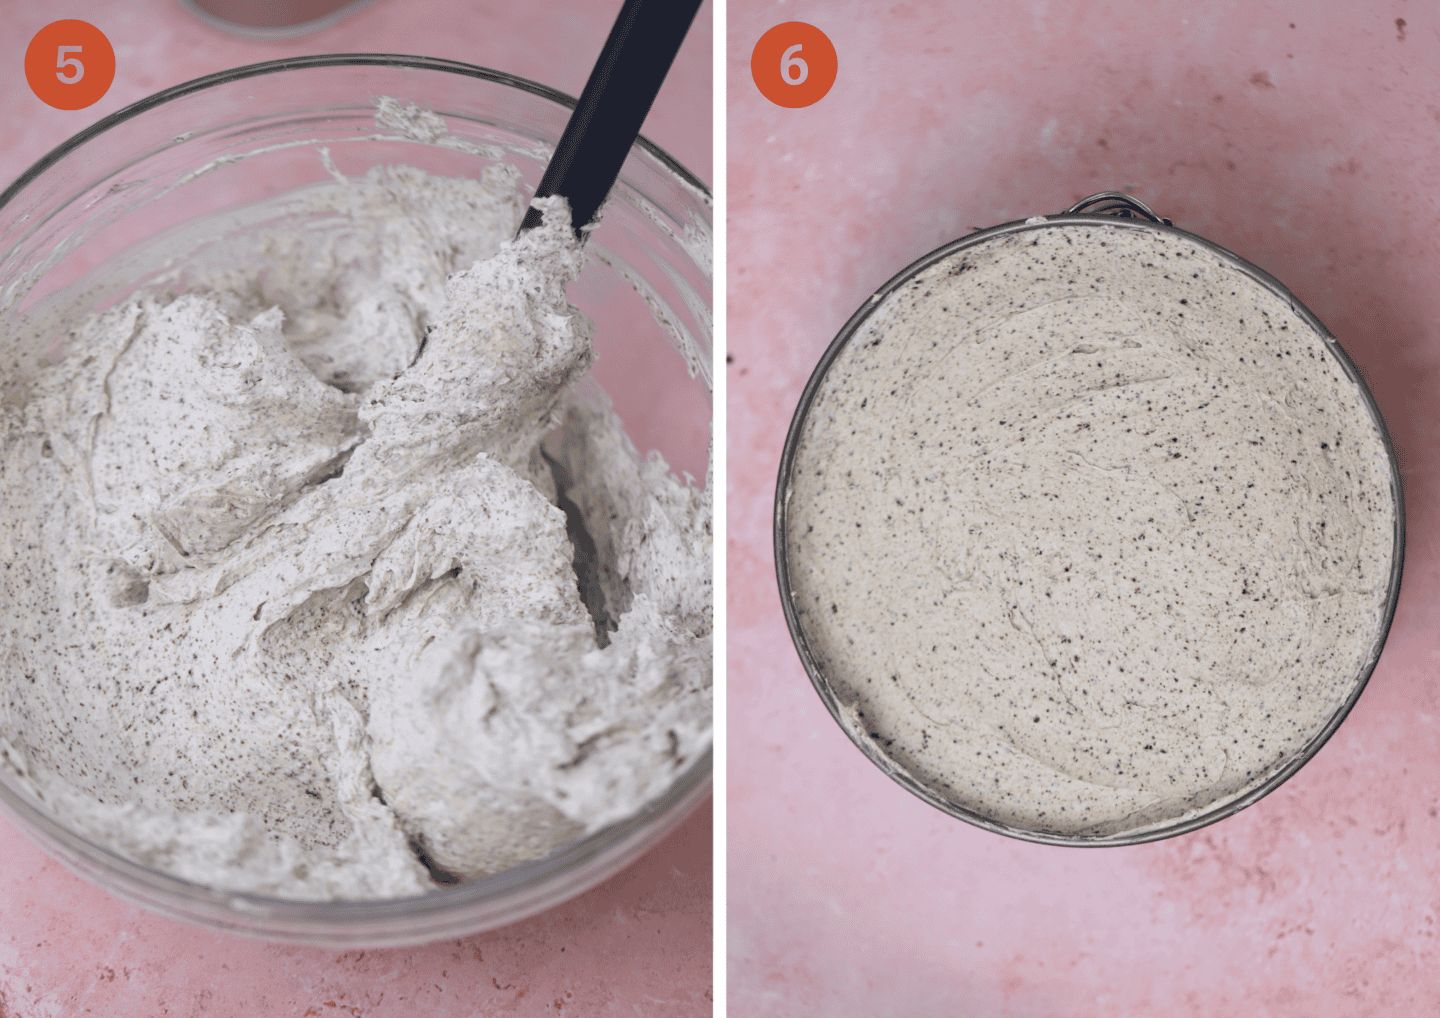 Mix the blended Oreos into the cheesecake mixture then spread onto the biscuit base.